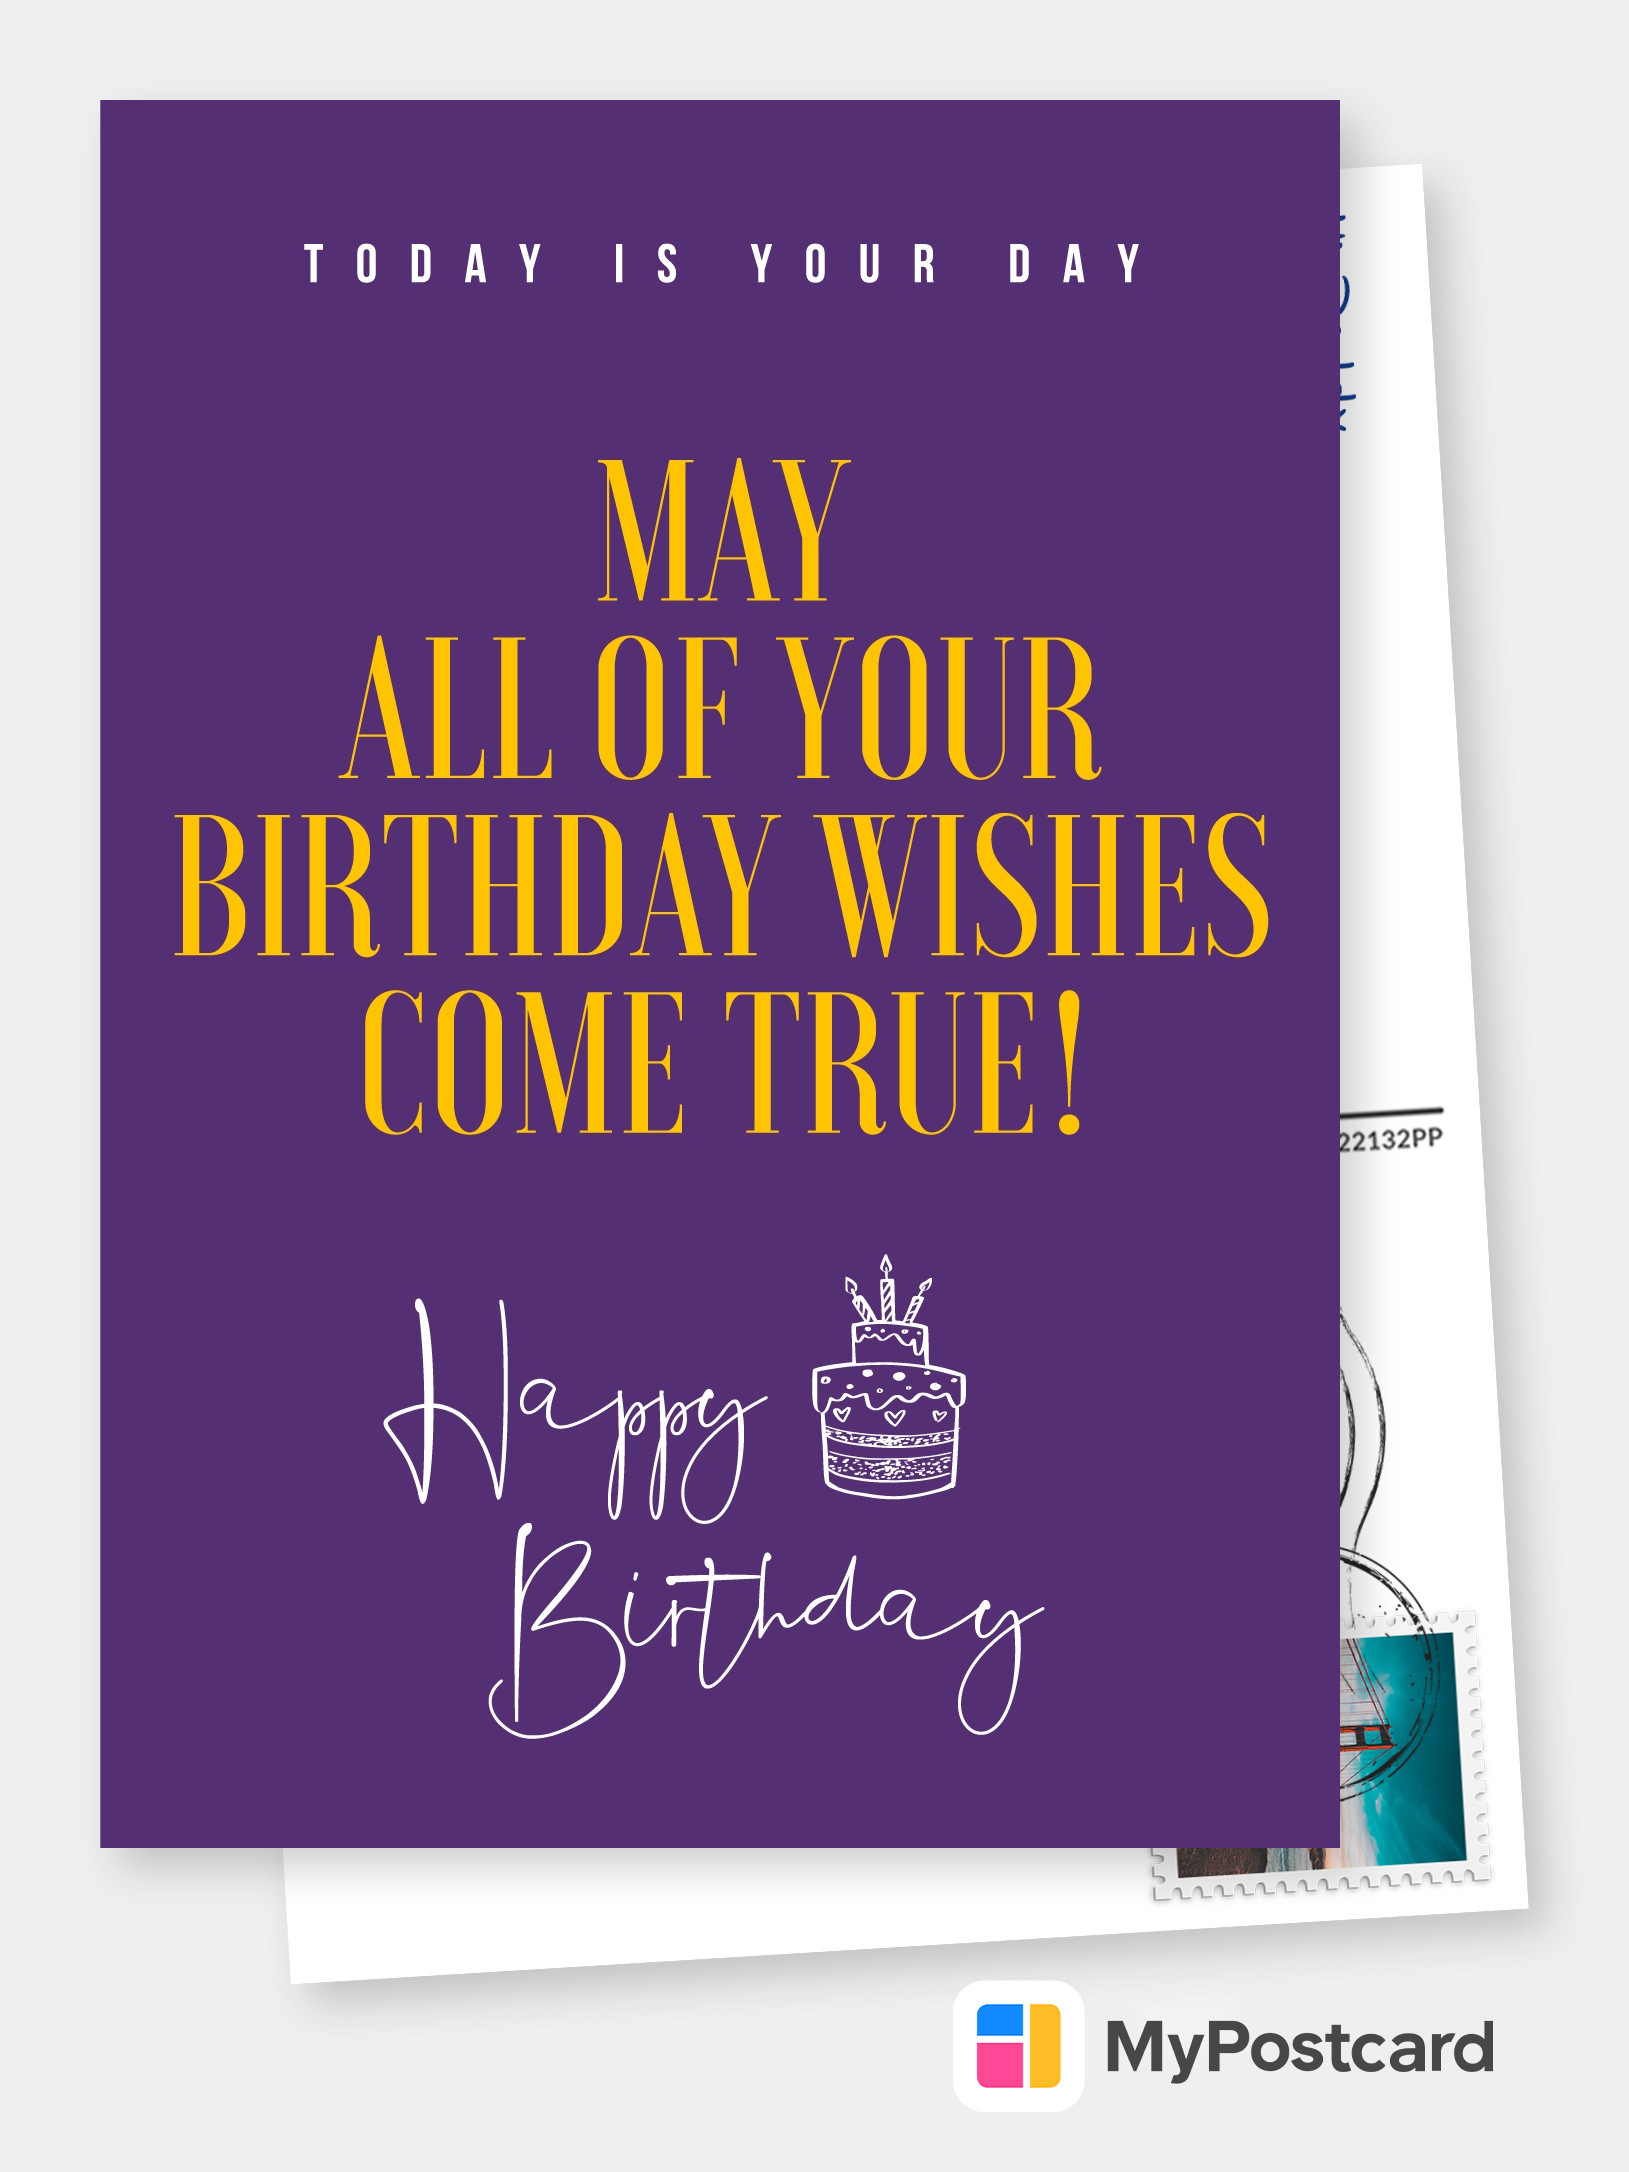 May all of your birthday wishes come true | Birthday Cards & Quotes 🎂🎁🎉  | Send real postcards online